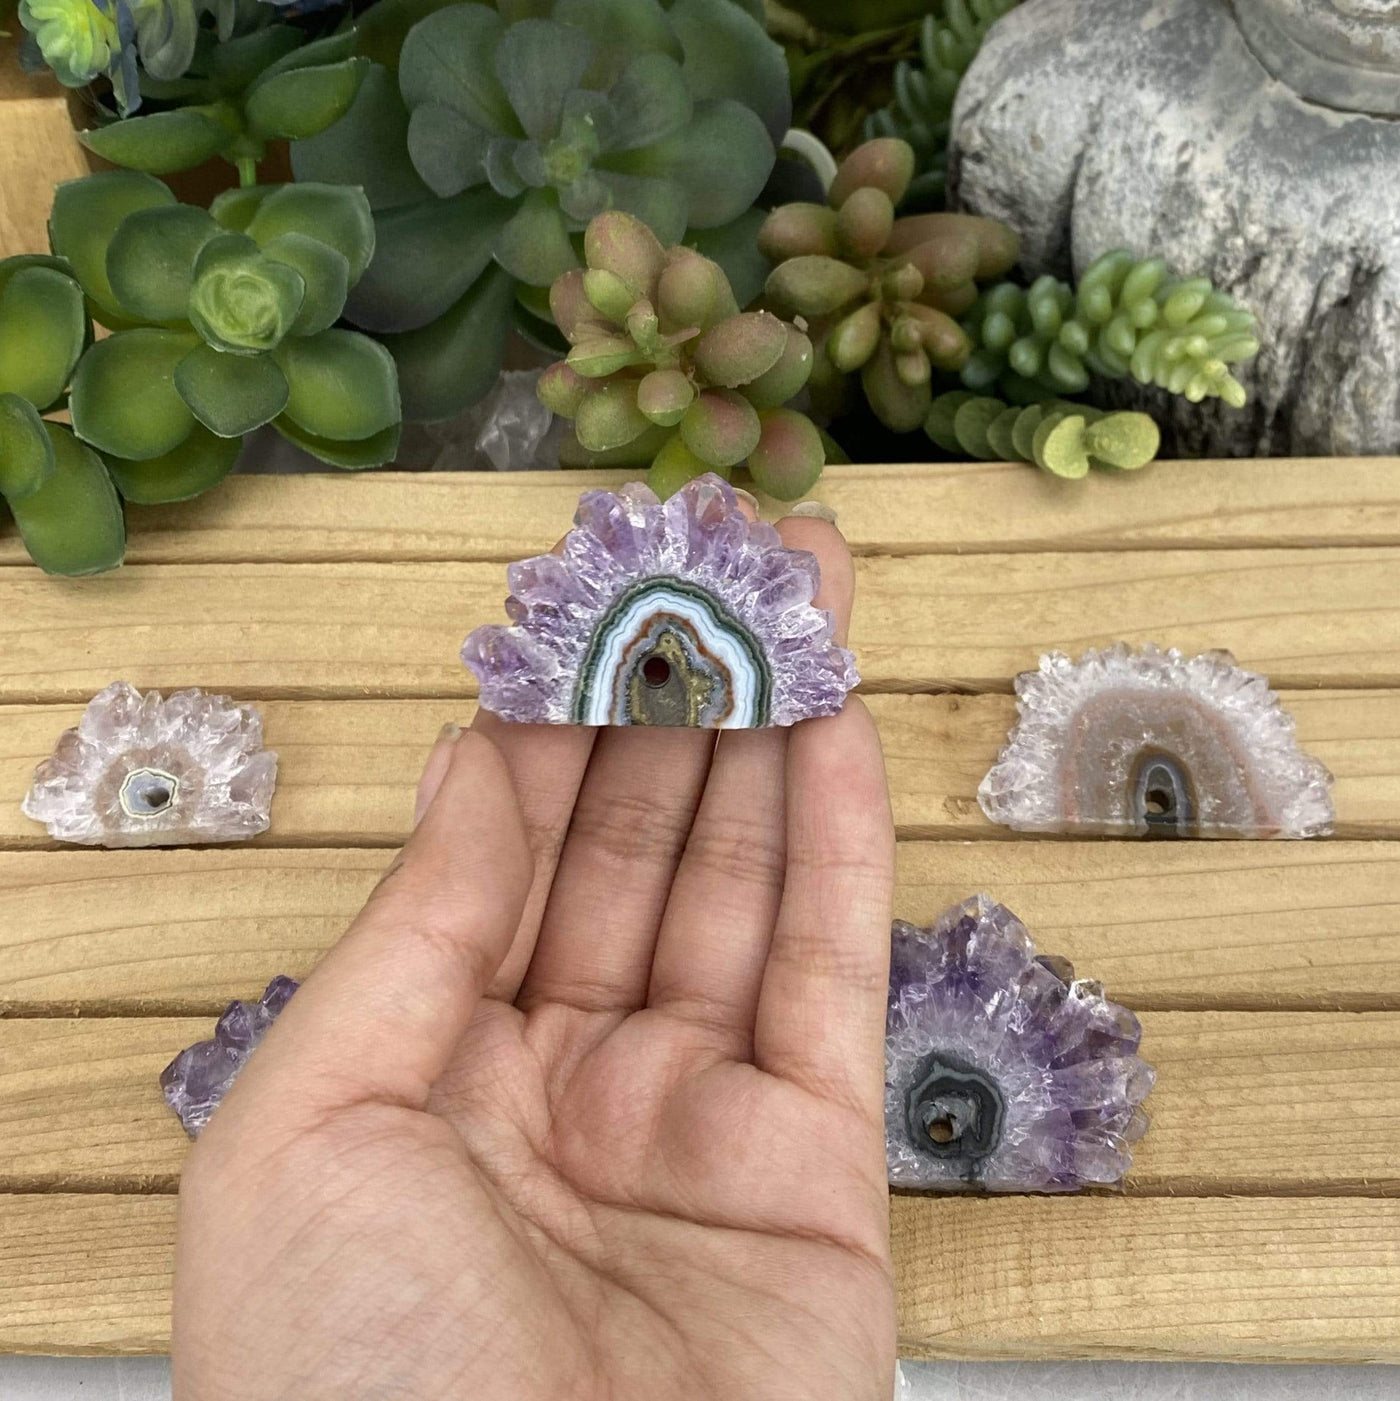 Amethyst Stalactite Slices - Single Drill Hole with #2 in a hand for size reference